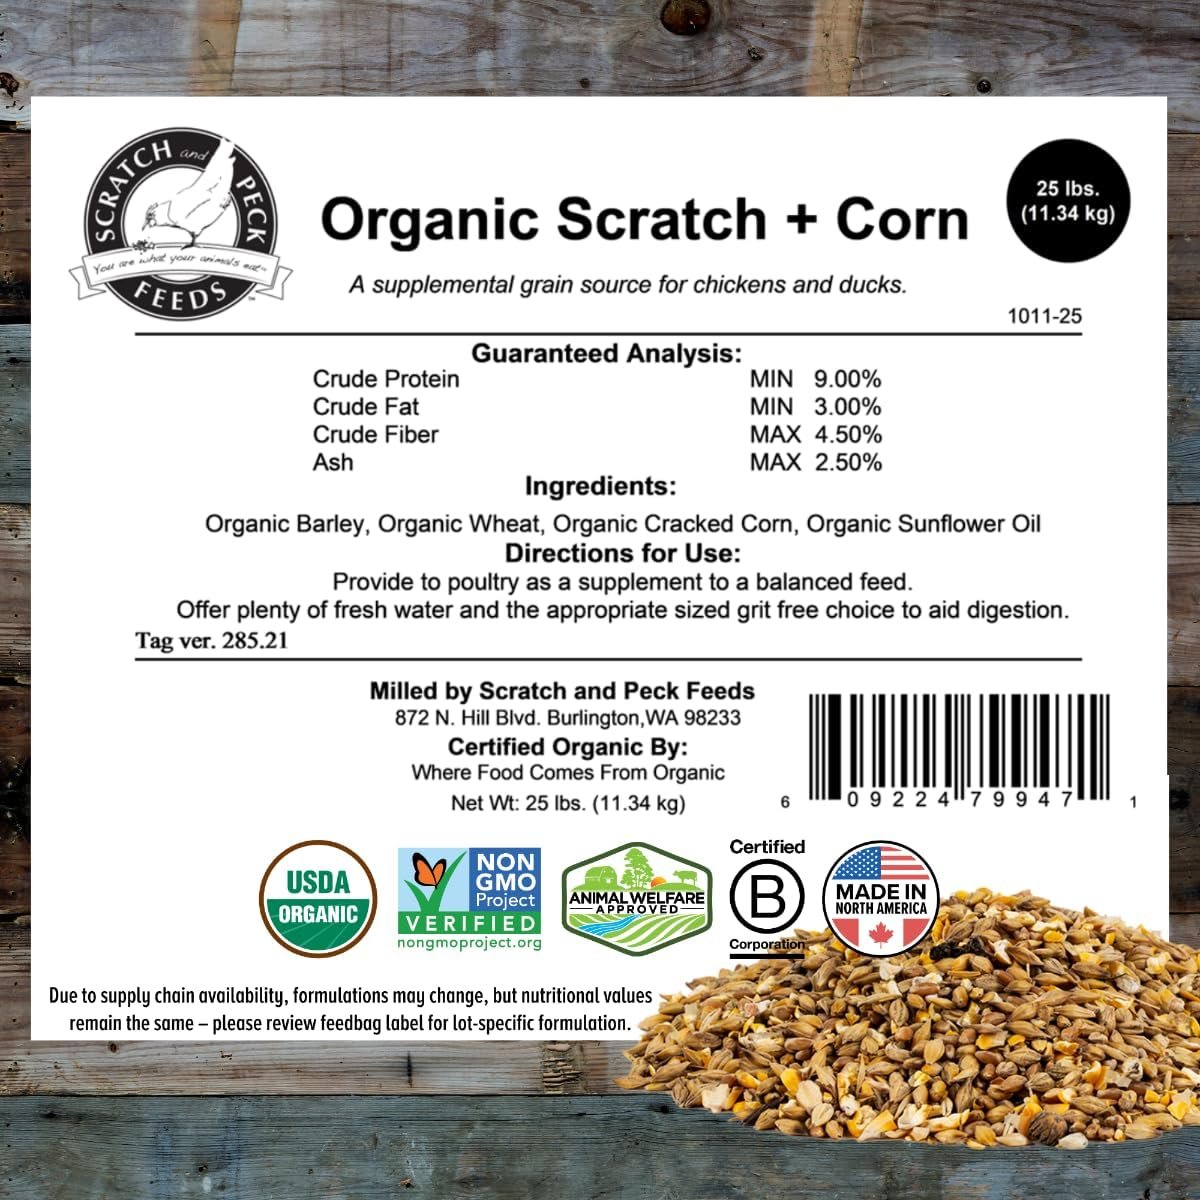 Scratch and Peck Feeds Organic Scratch + Corn, 9% Protein - Premium Supplemental Grain Source for Chickens and Ducks - 25lb